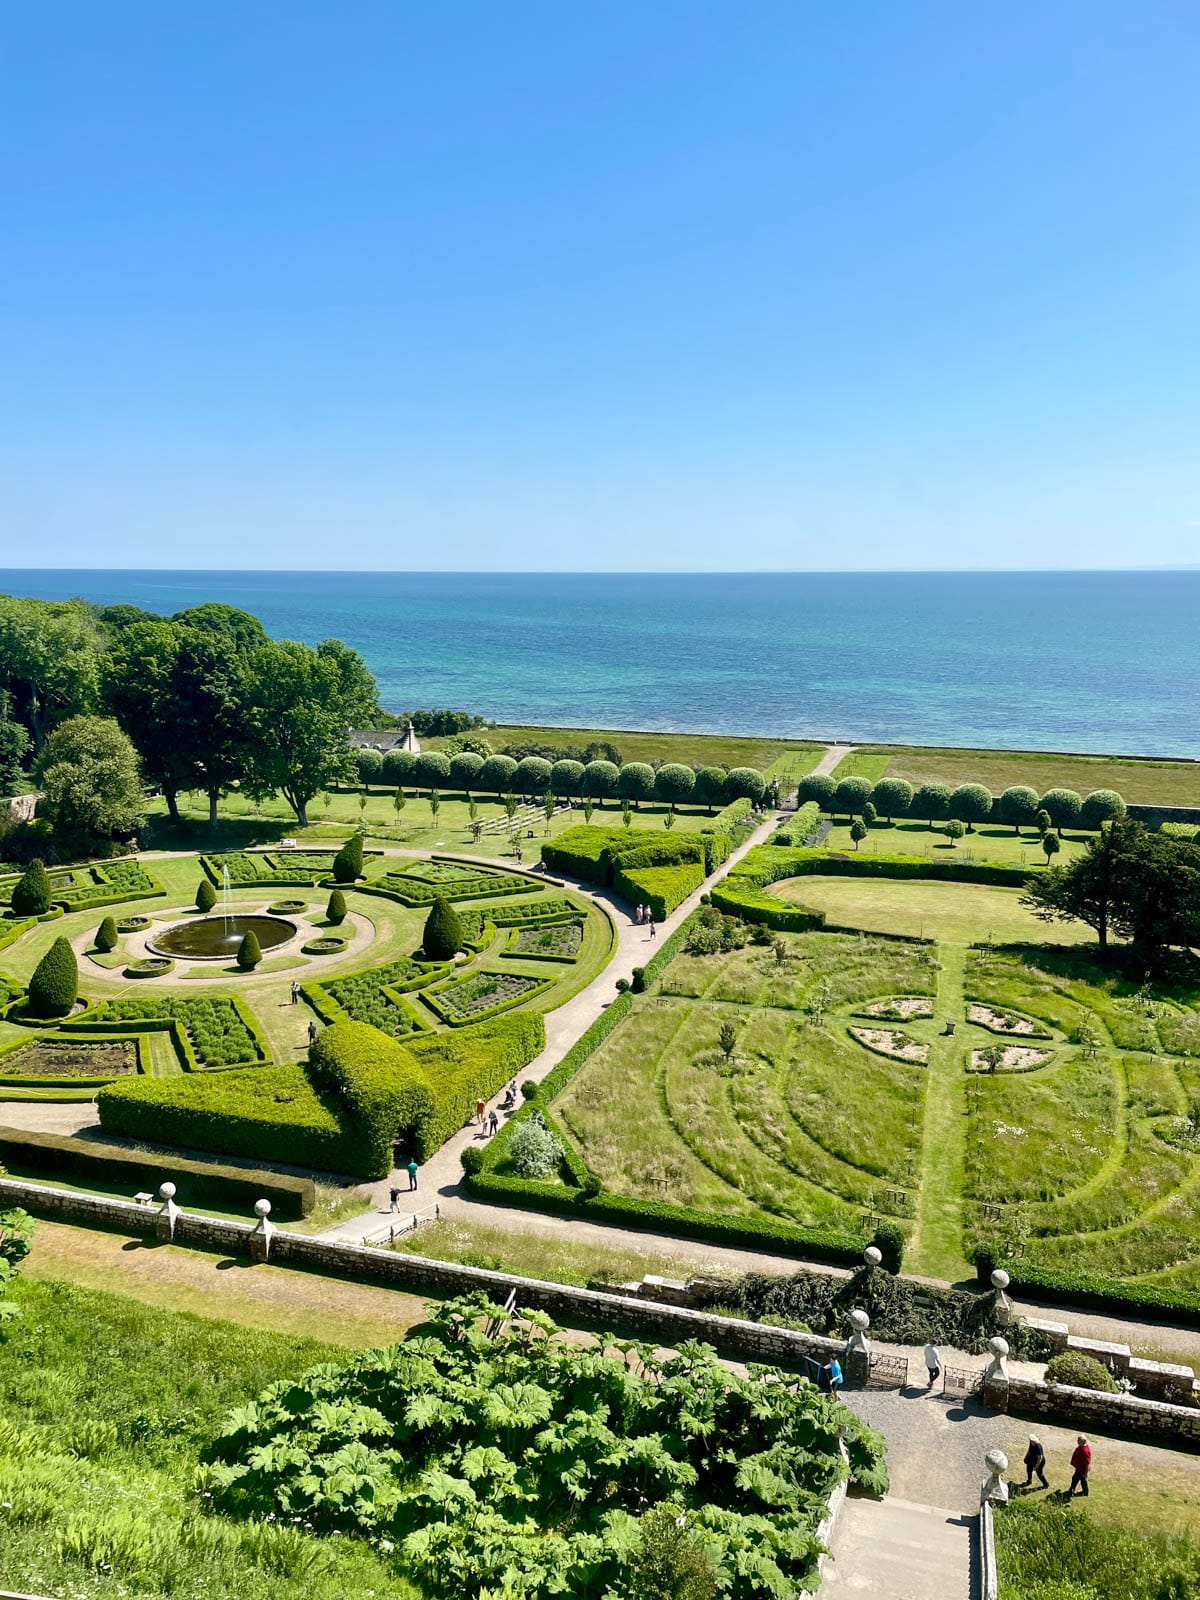 Manicured gardens with the sea in the background.